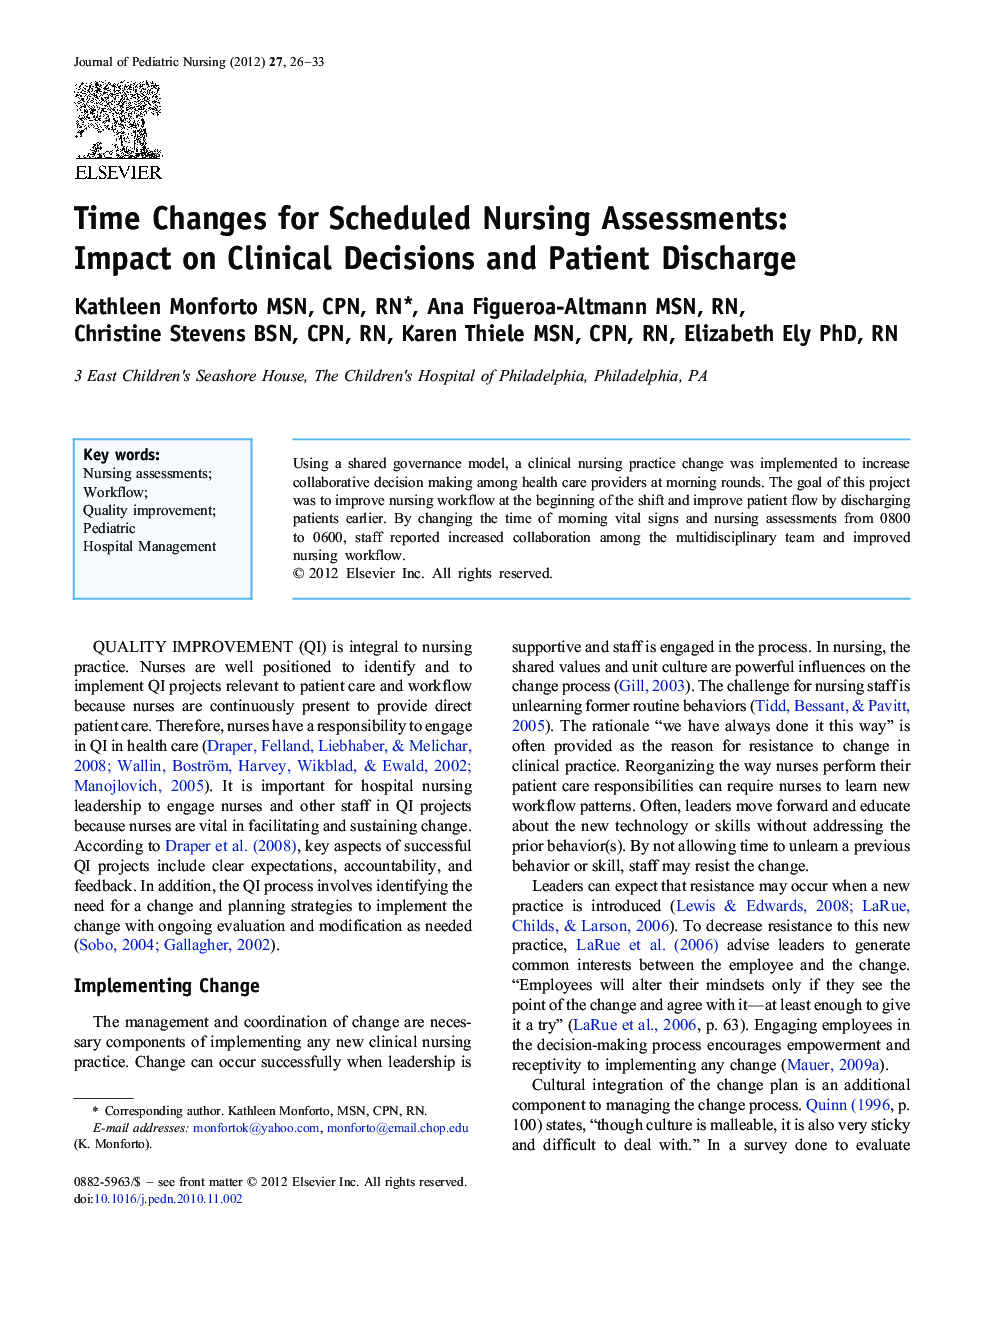 Time Changes for Scheduled Nursing Assessments: Impact on Clinical Decisions and Patient Discharge